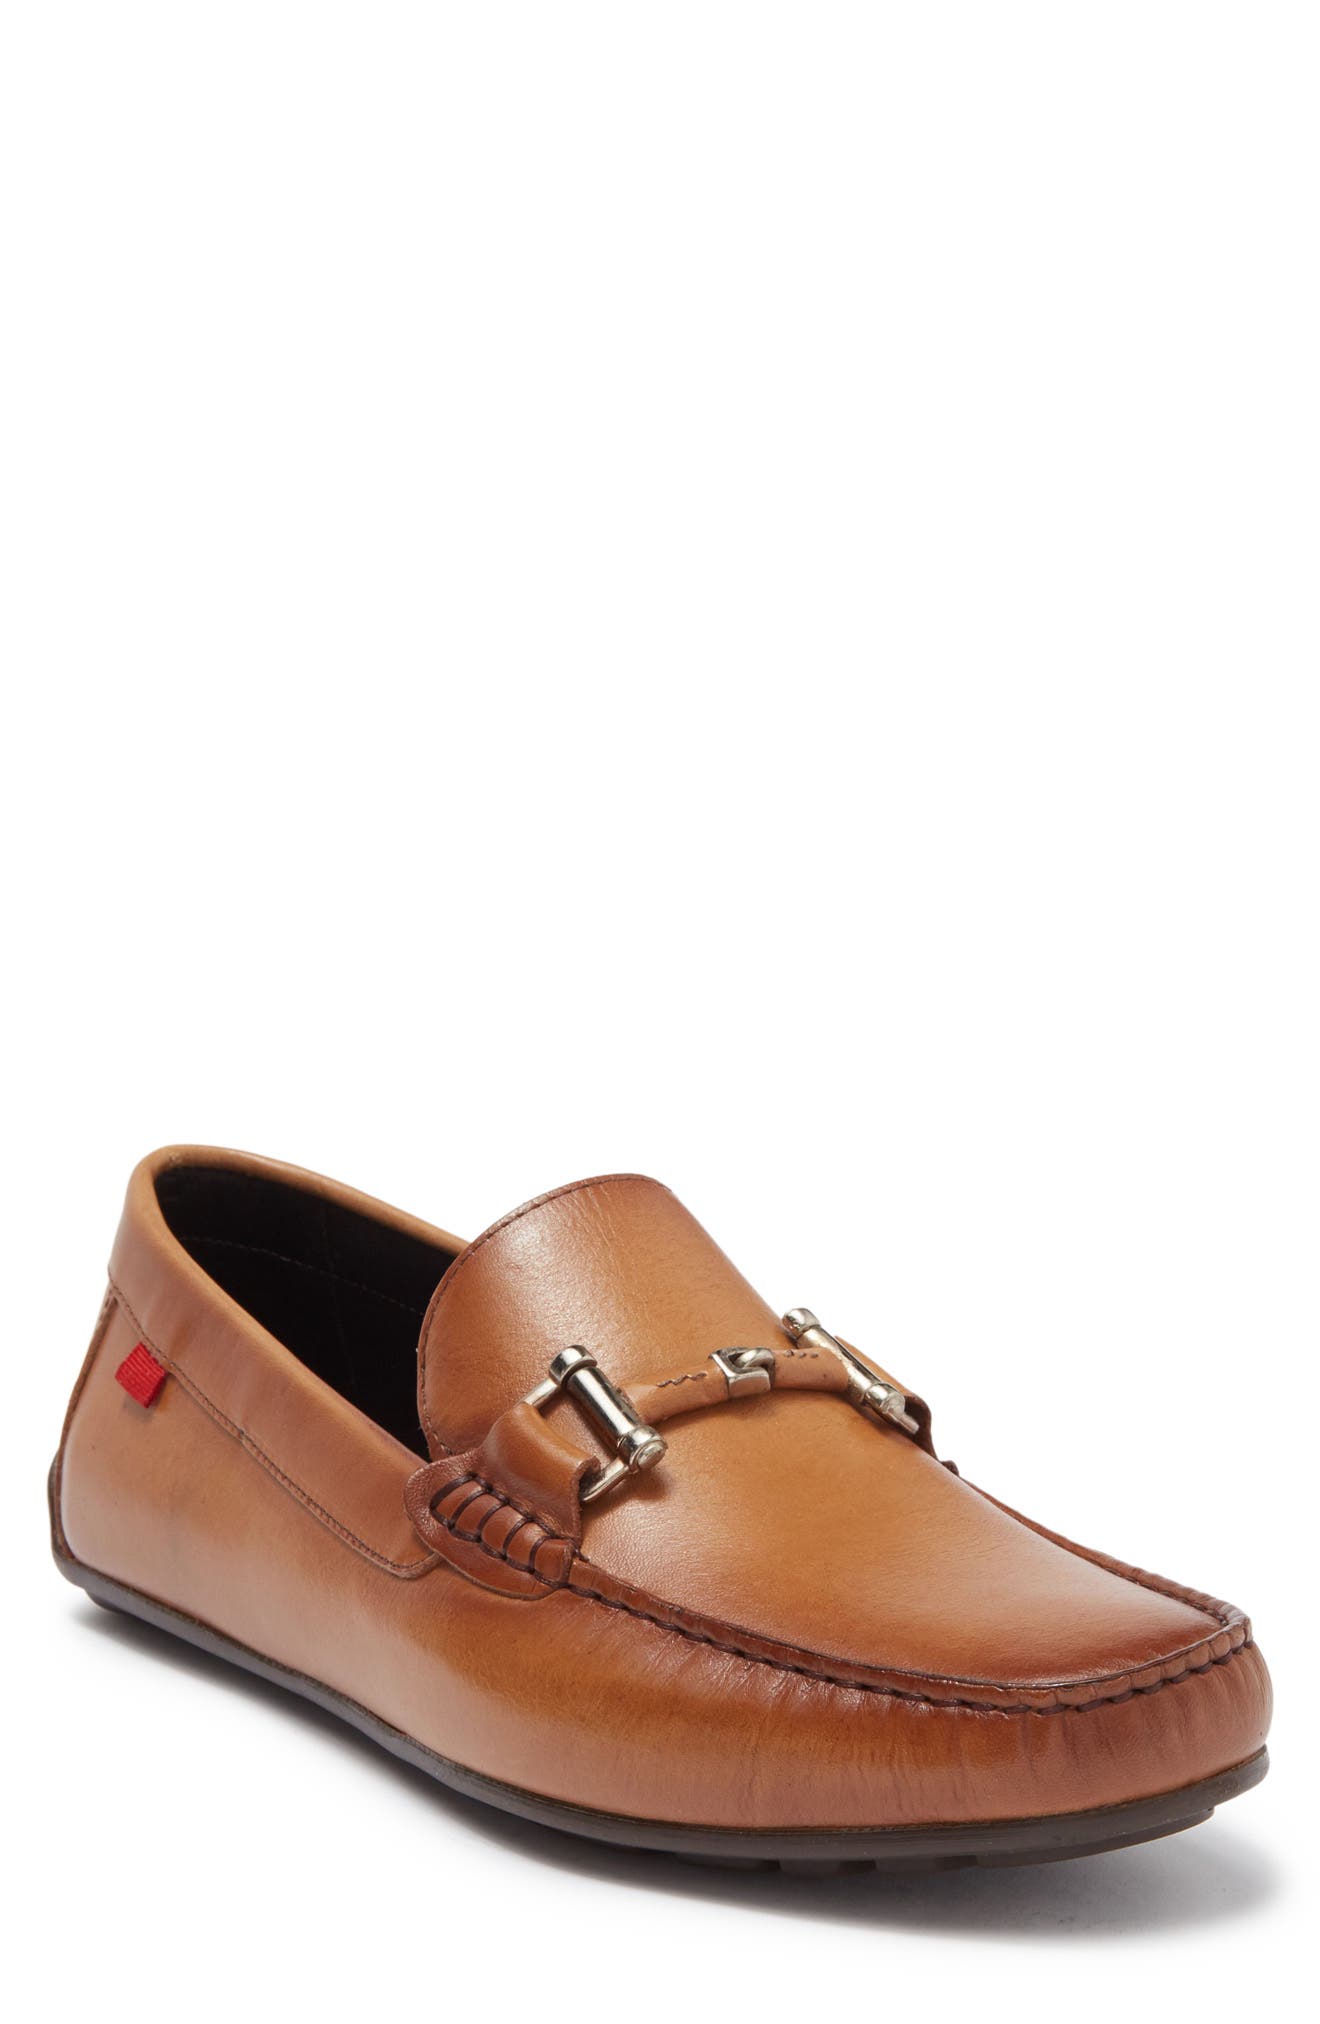 Marc Joseph New York Lincoln Metal Bit Leather Driving Loafer In Tan